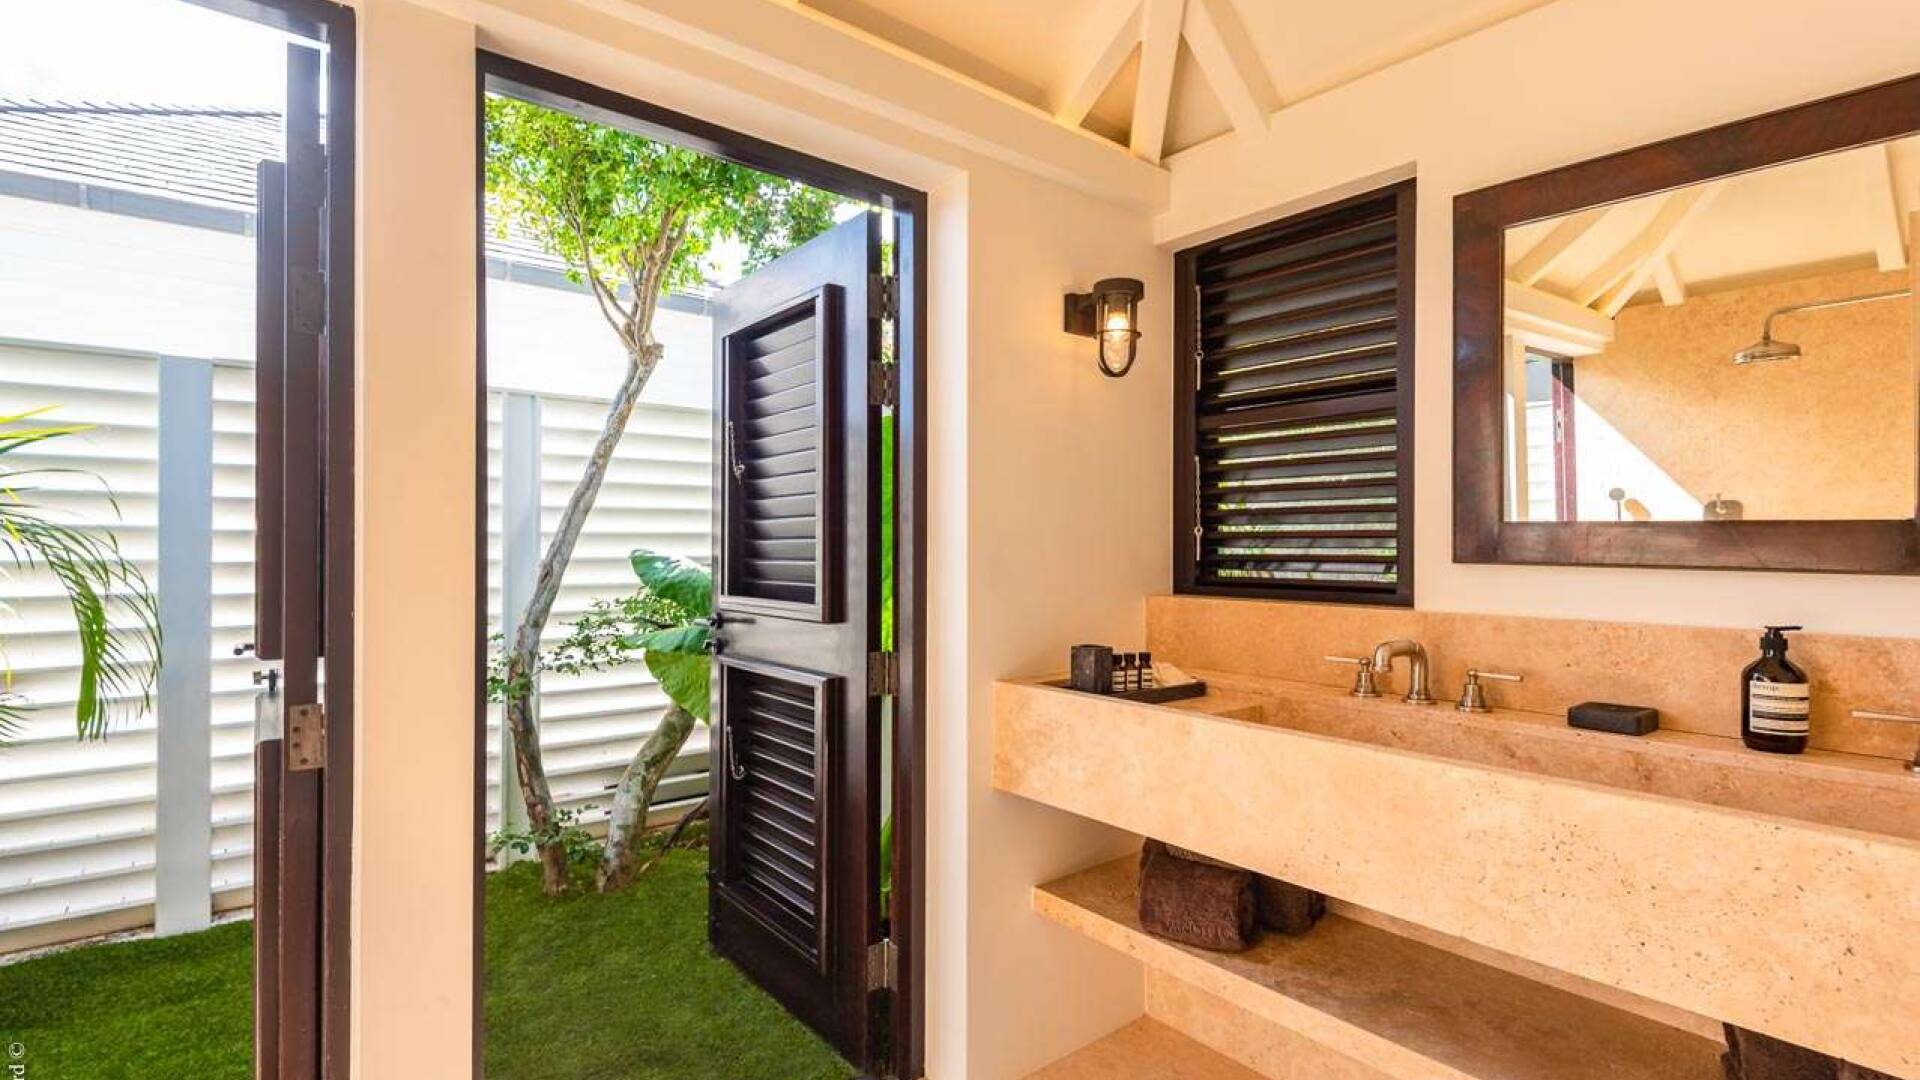 Bathroom at WV MNT, Pointe Milou, St. Barthelemy